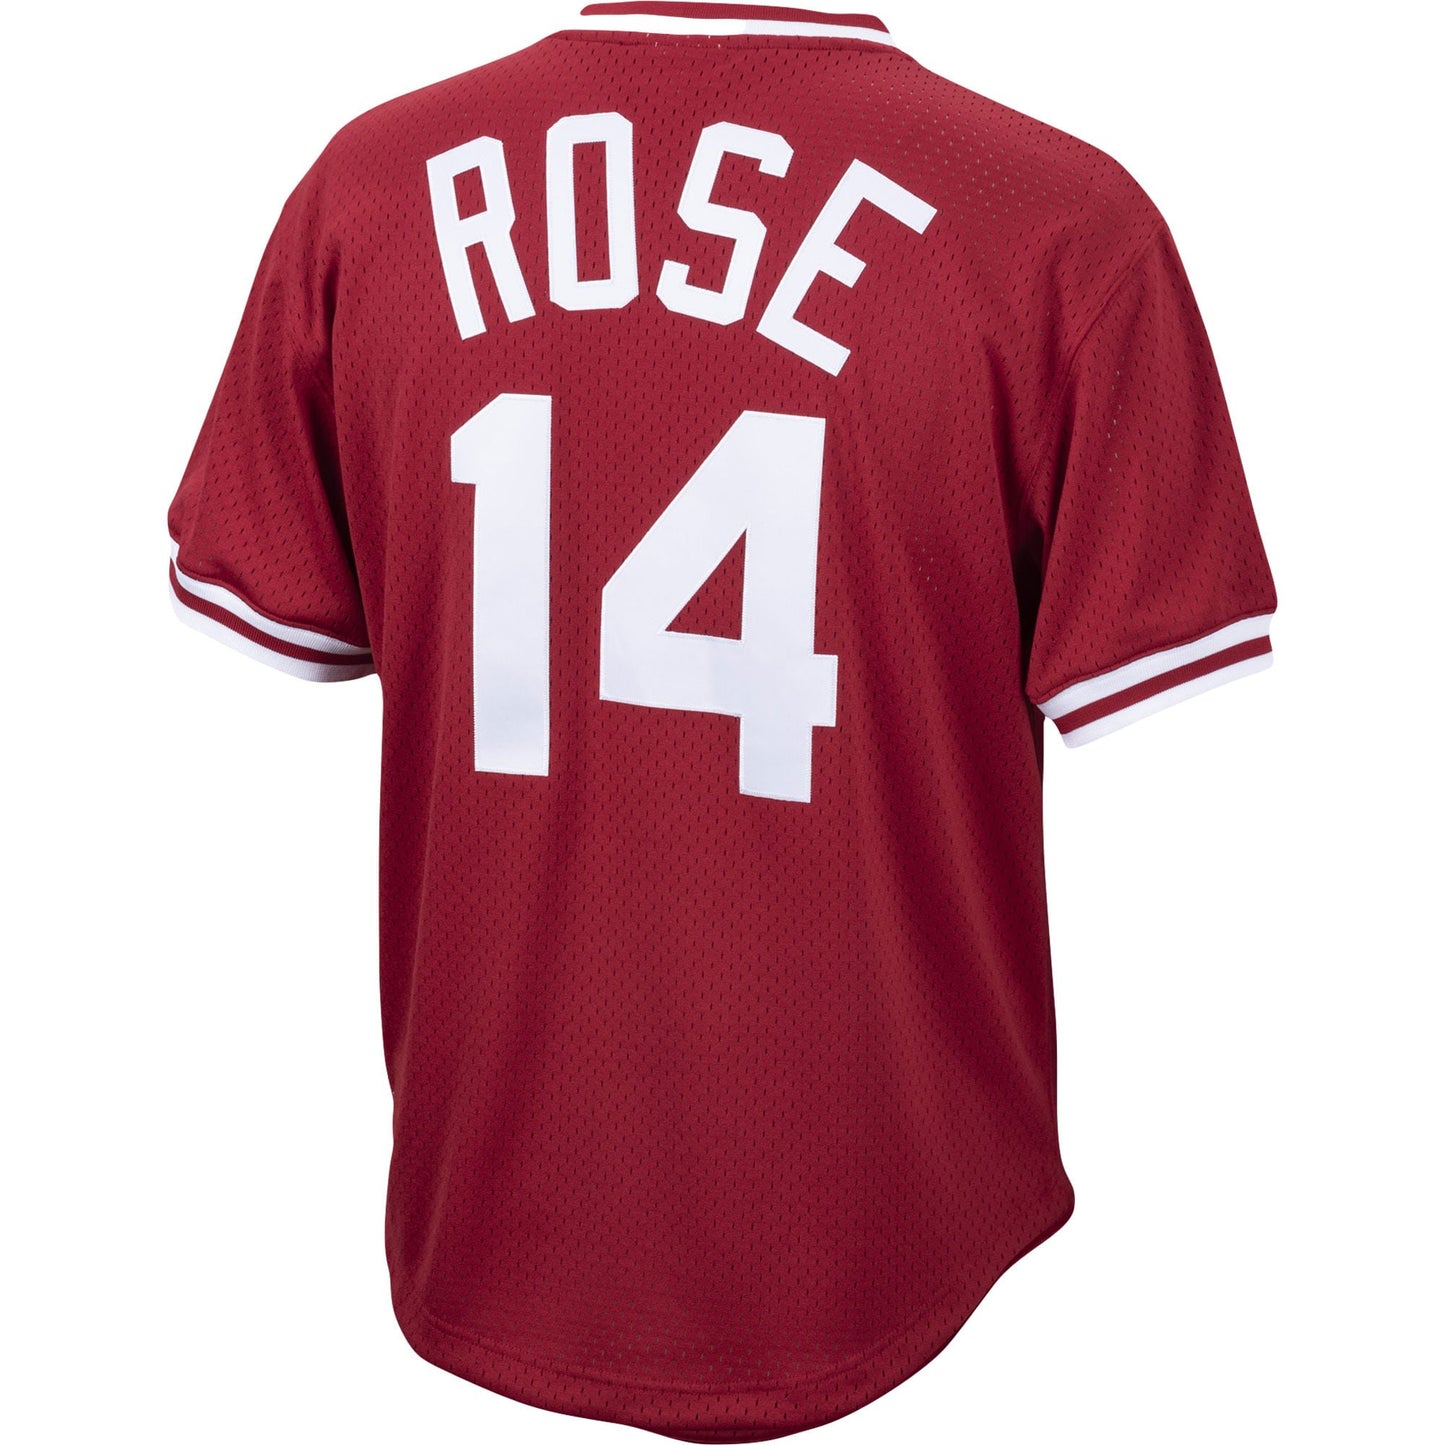 Men's Pete Rose Cincinnati Reds Mitchell & Ness Cooperstown Collection Authentic Mesh Batting Practice Jersey - Red